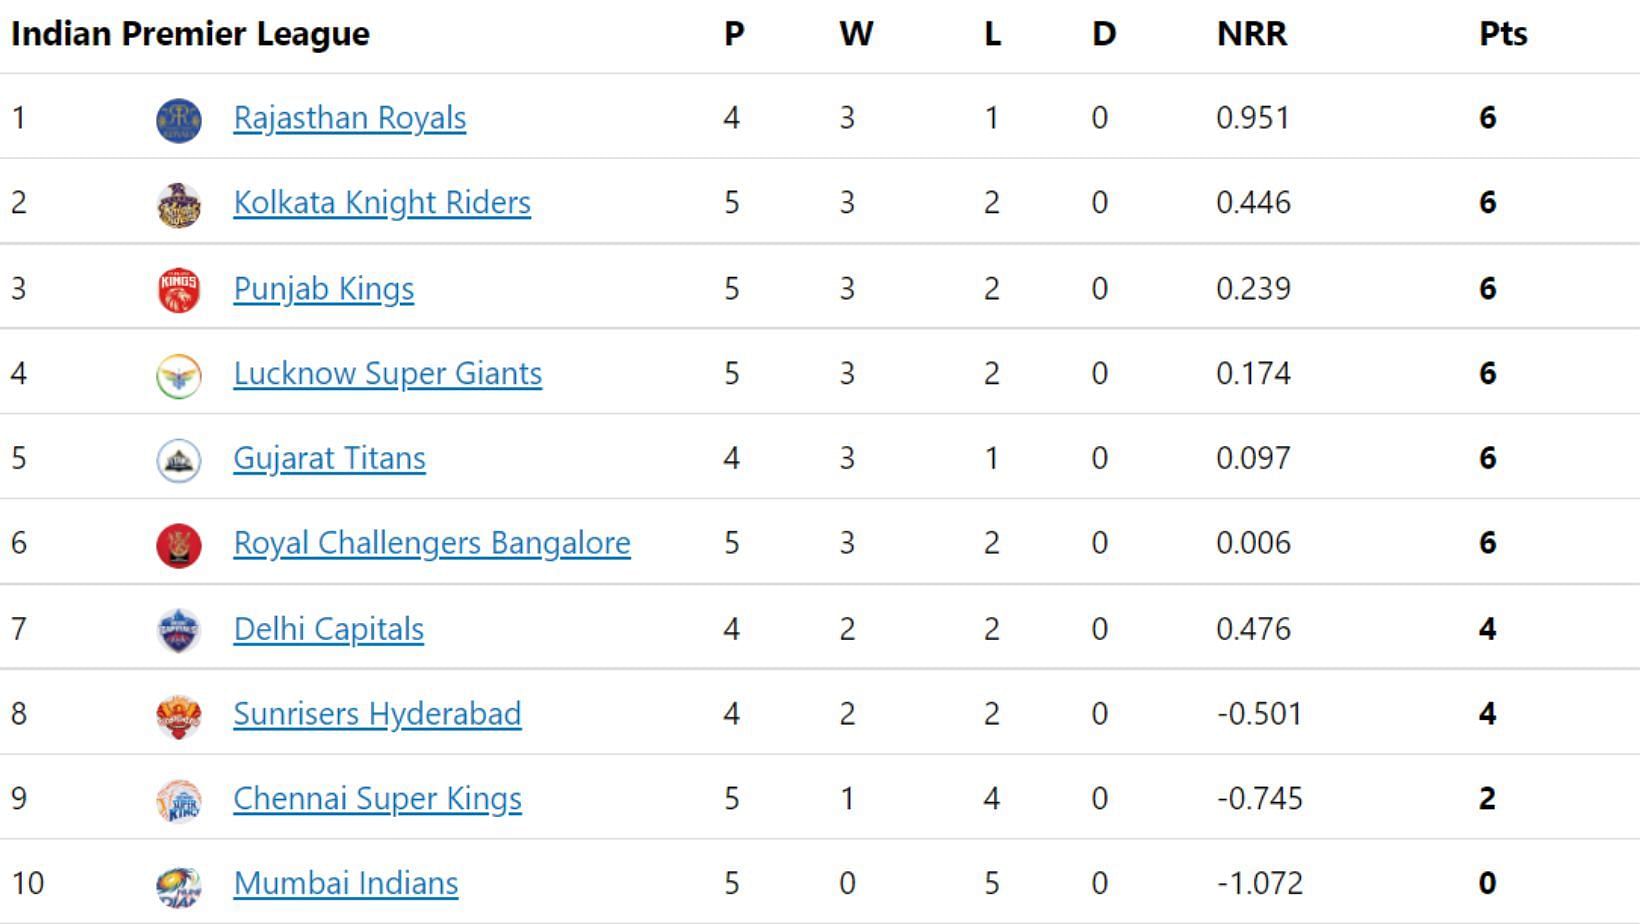 Punjab Kings enter the top-3 of the IPL 2022 points table.